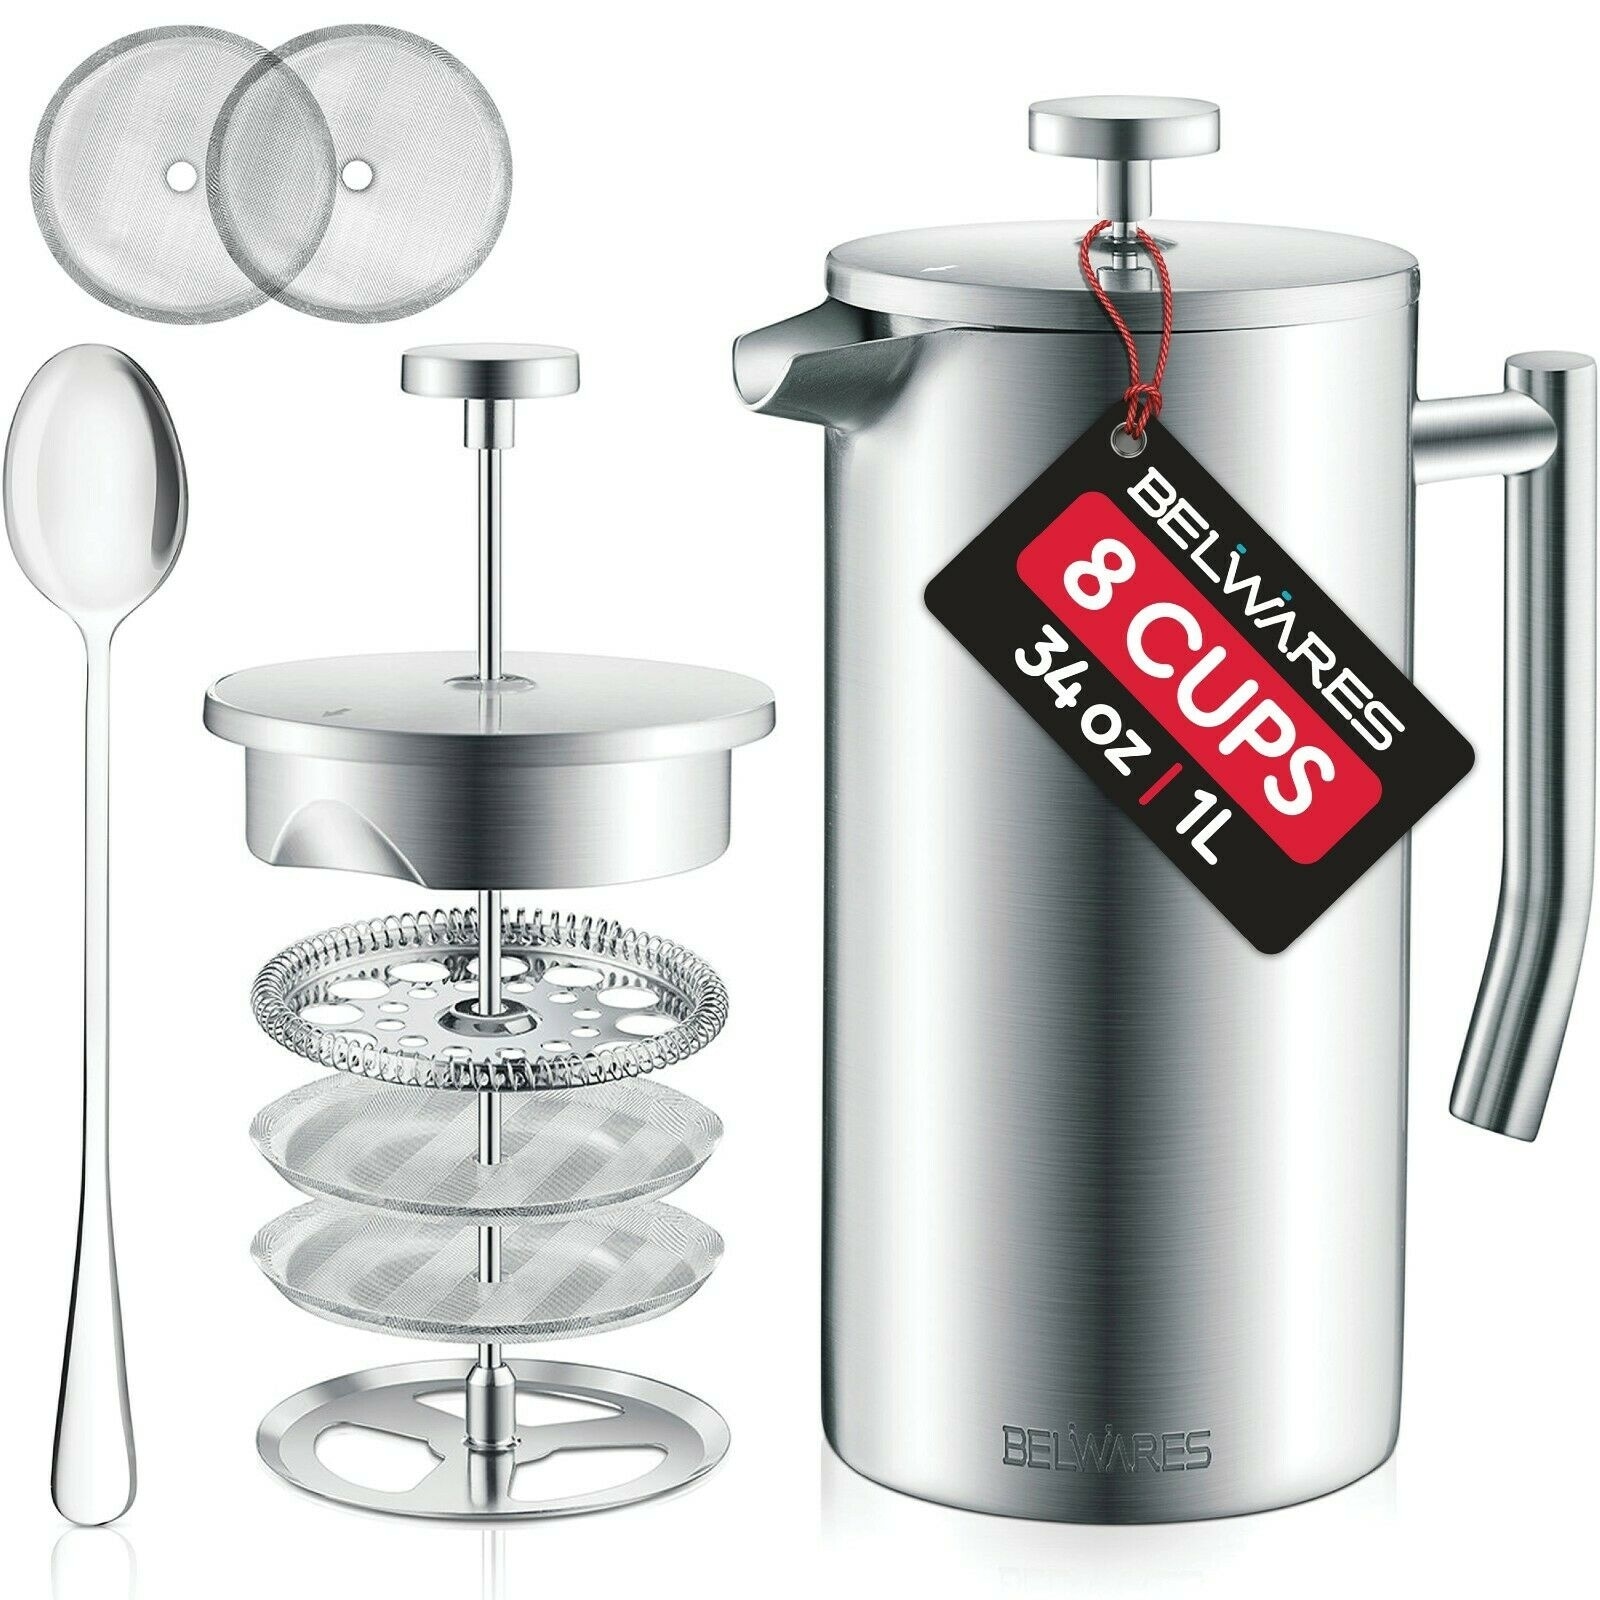 https://ak1.ostkcdn.com/images/products/is/images/direct/e0cb95ead83c121d7fab3236eeb674132f58ef5a/Belwares-Stainless-Steel-French-Coffee-Press%2C-With-Double-Wall-and-Extra-Filters.jpg